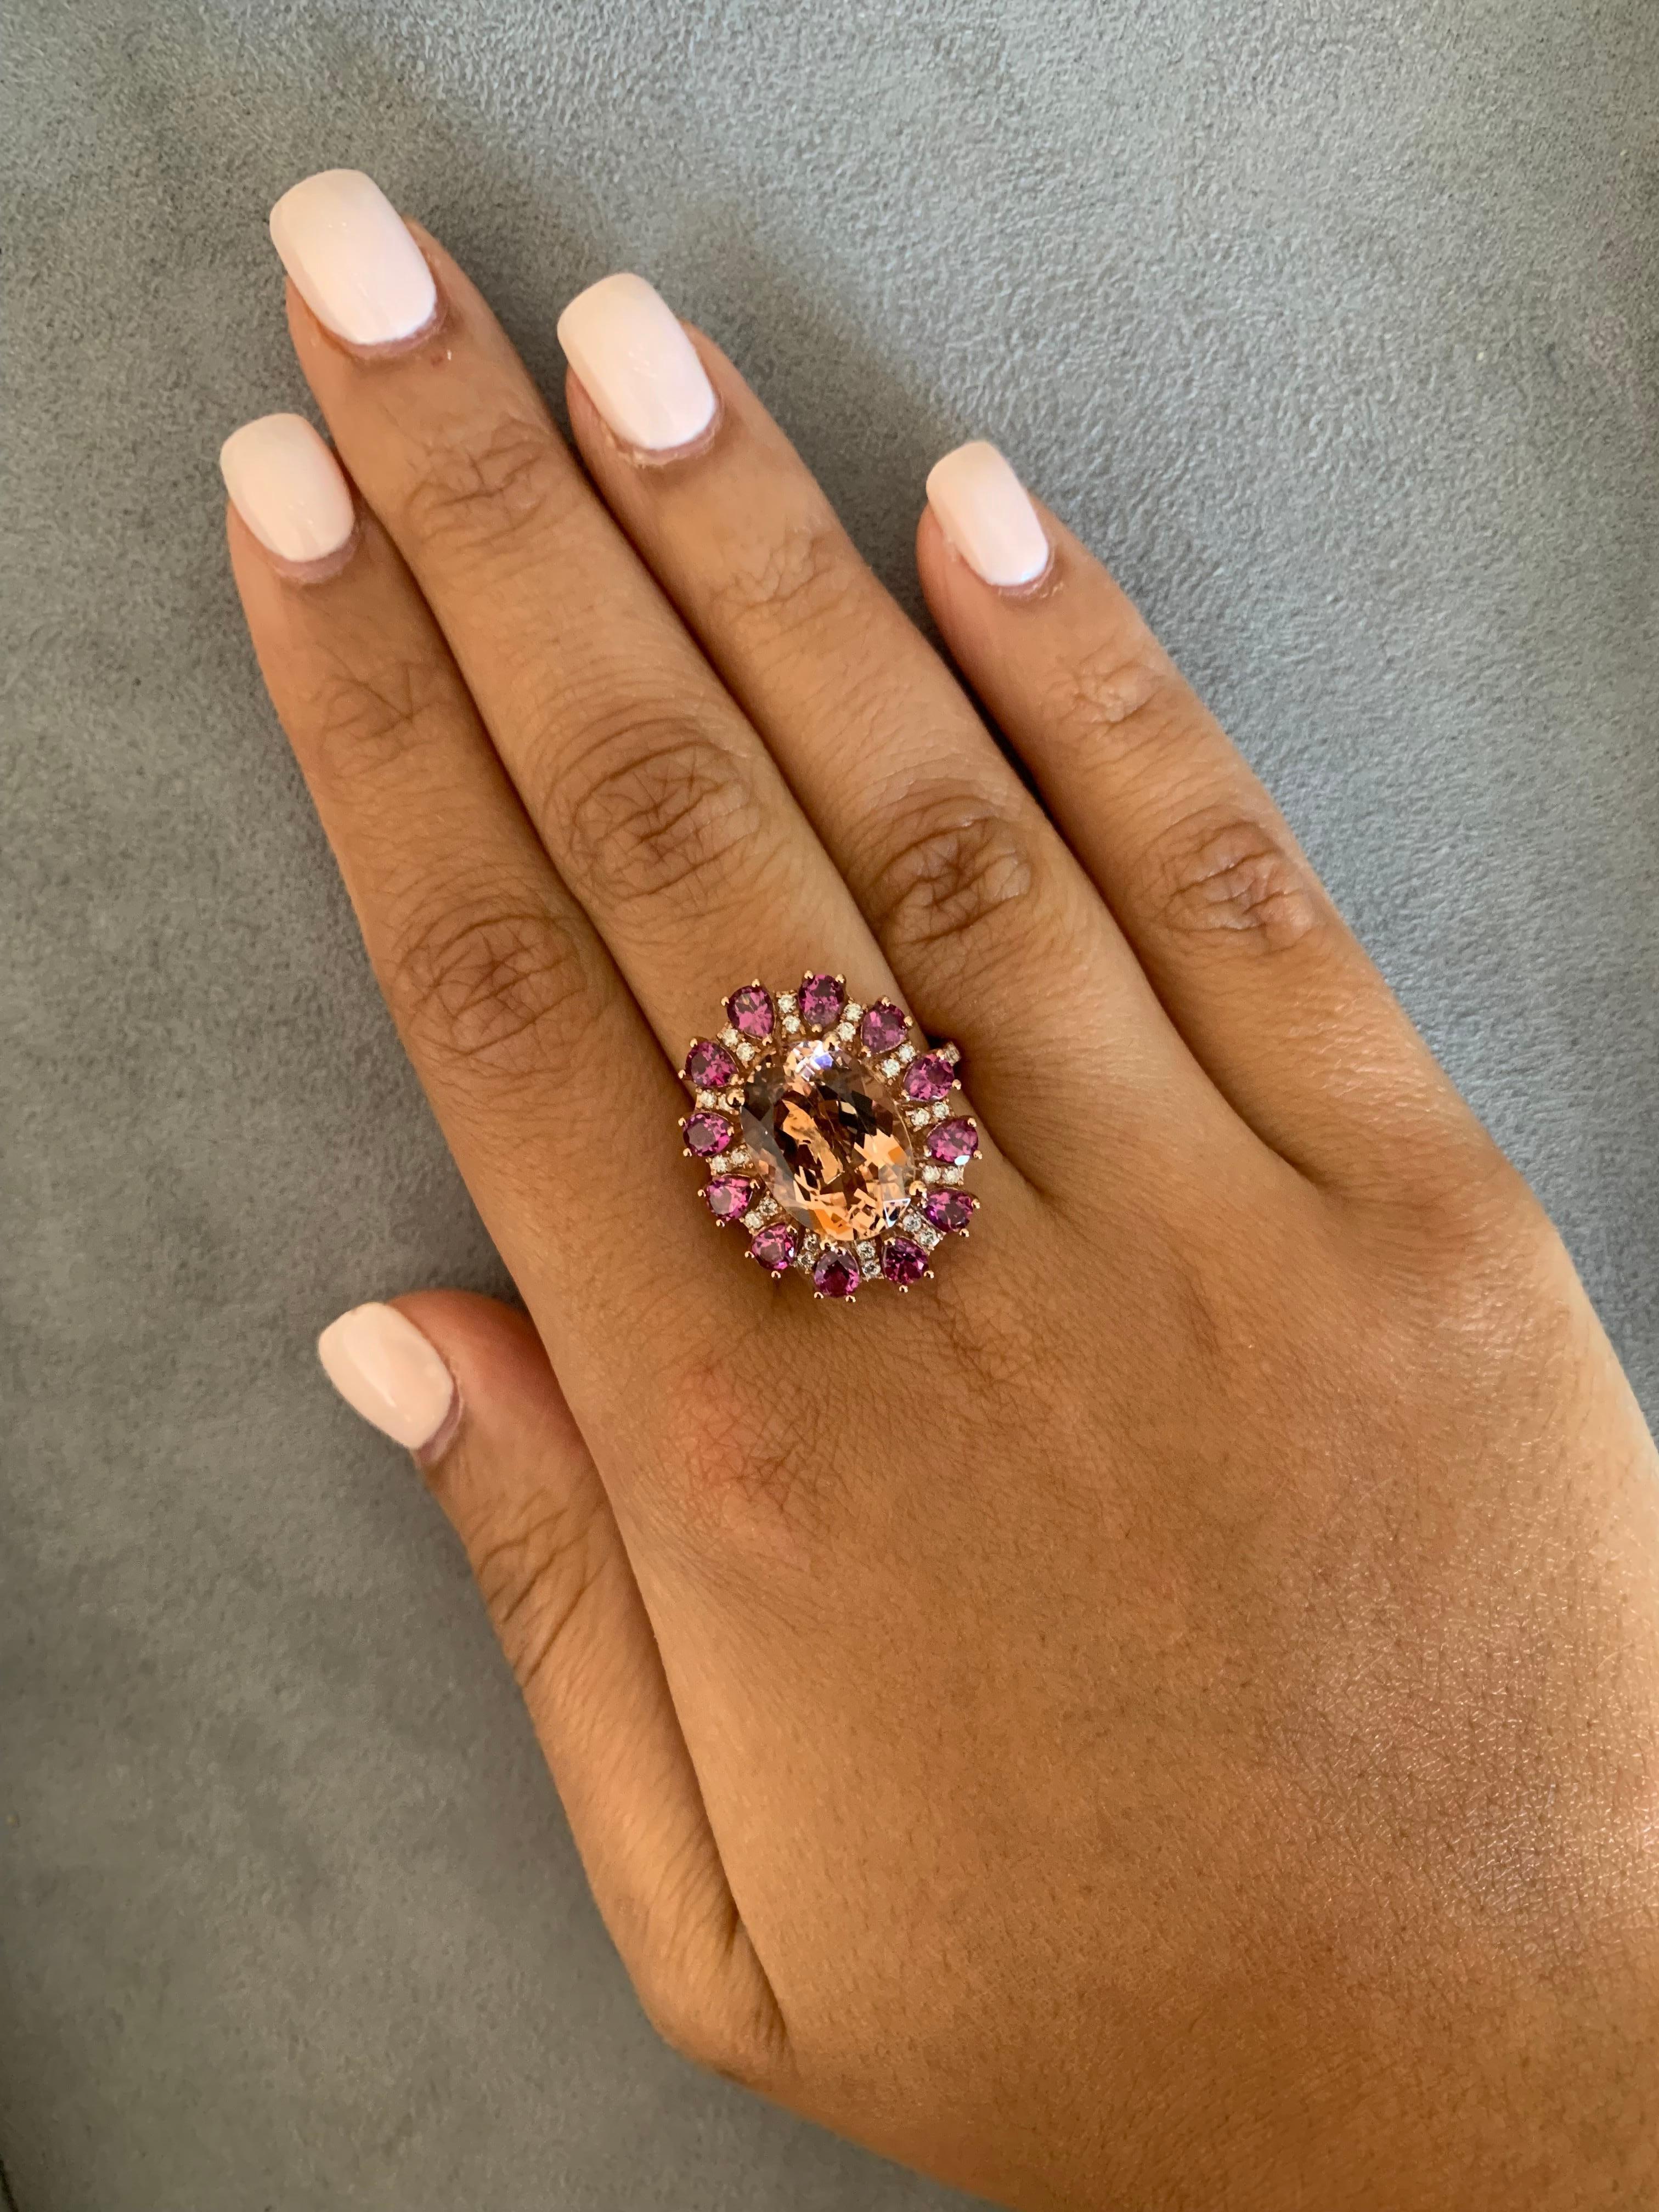 This collection features an array of magnificent morganites! Accented with diamonds these rings are made in rose gold and present a classic yet elegant look. The vibrant addition of red rhodolites perfectly assists the peachy hue of the morganite.